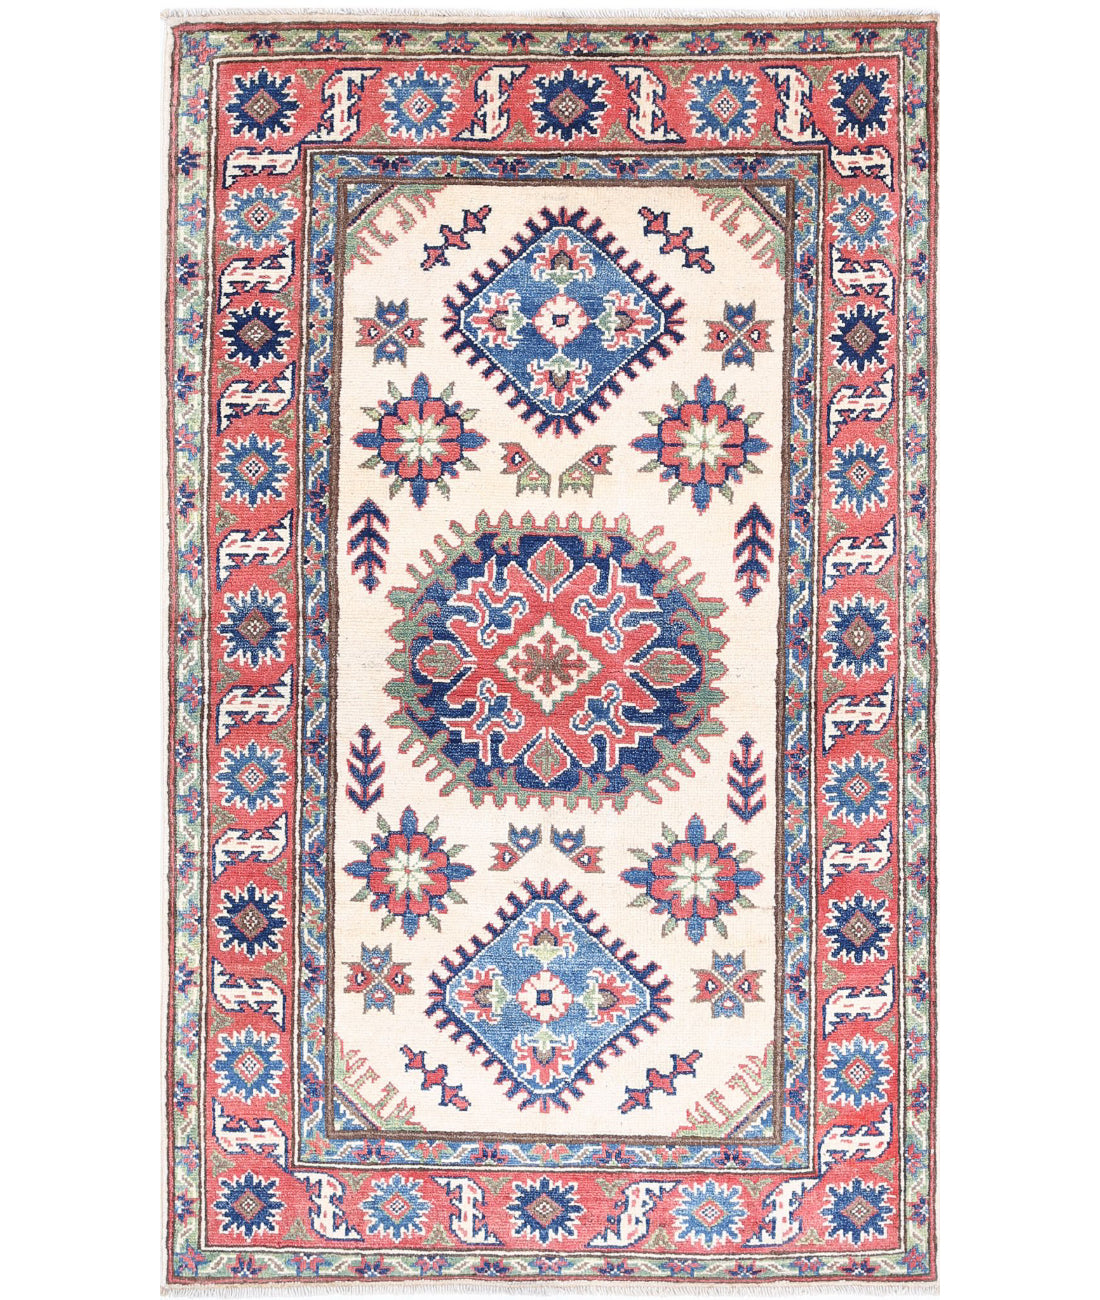 Hand Knotted Tribal Kazak Wool Rug - 2'10'' x 4'11'' 2'10'' x 4'11'' (85 X 148) / Ivory / Red